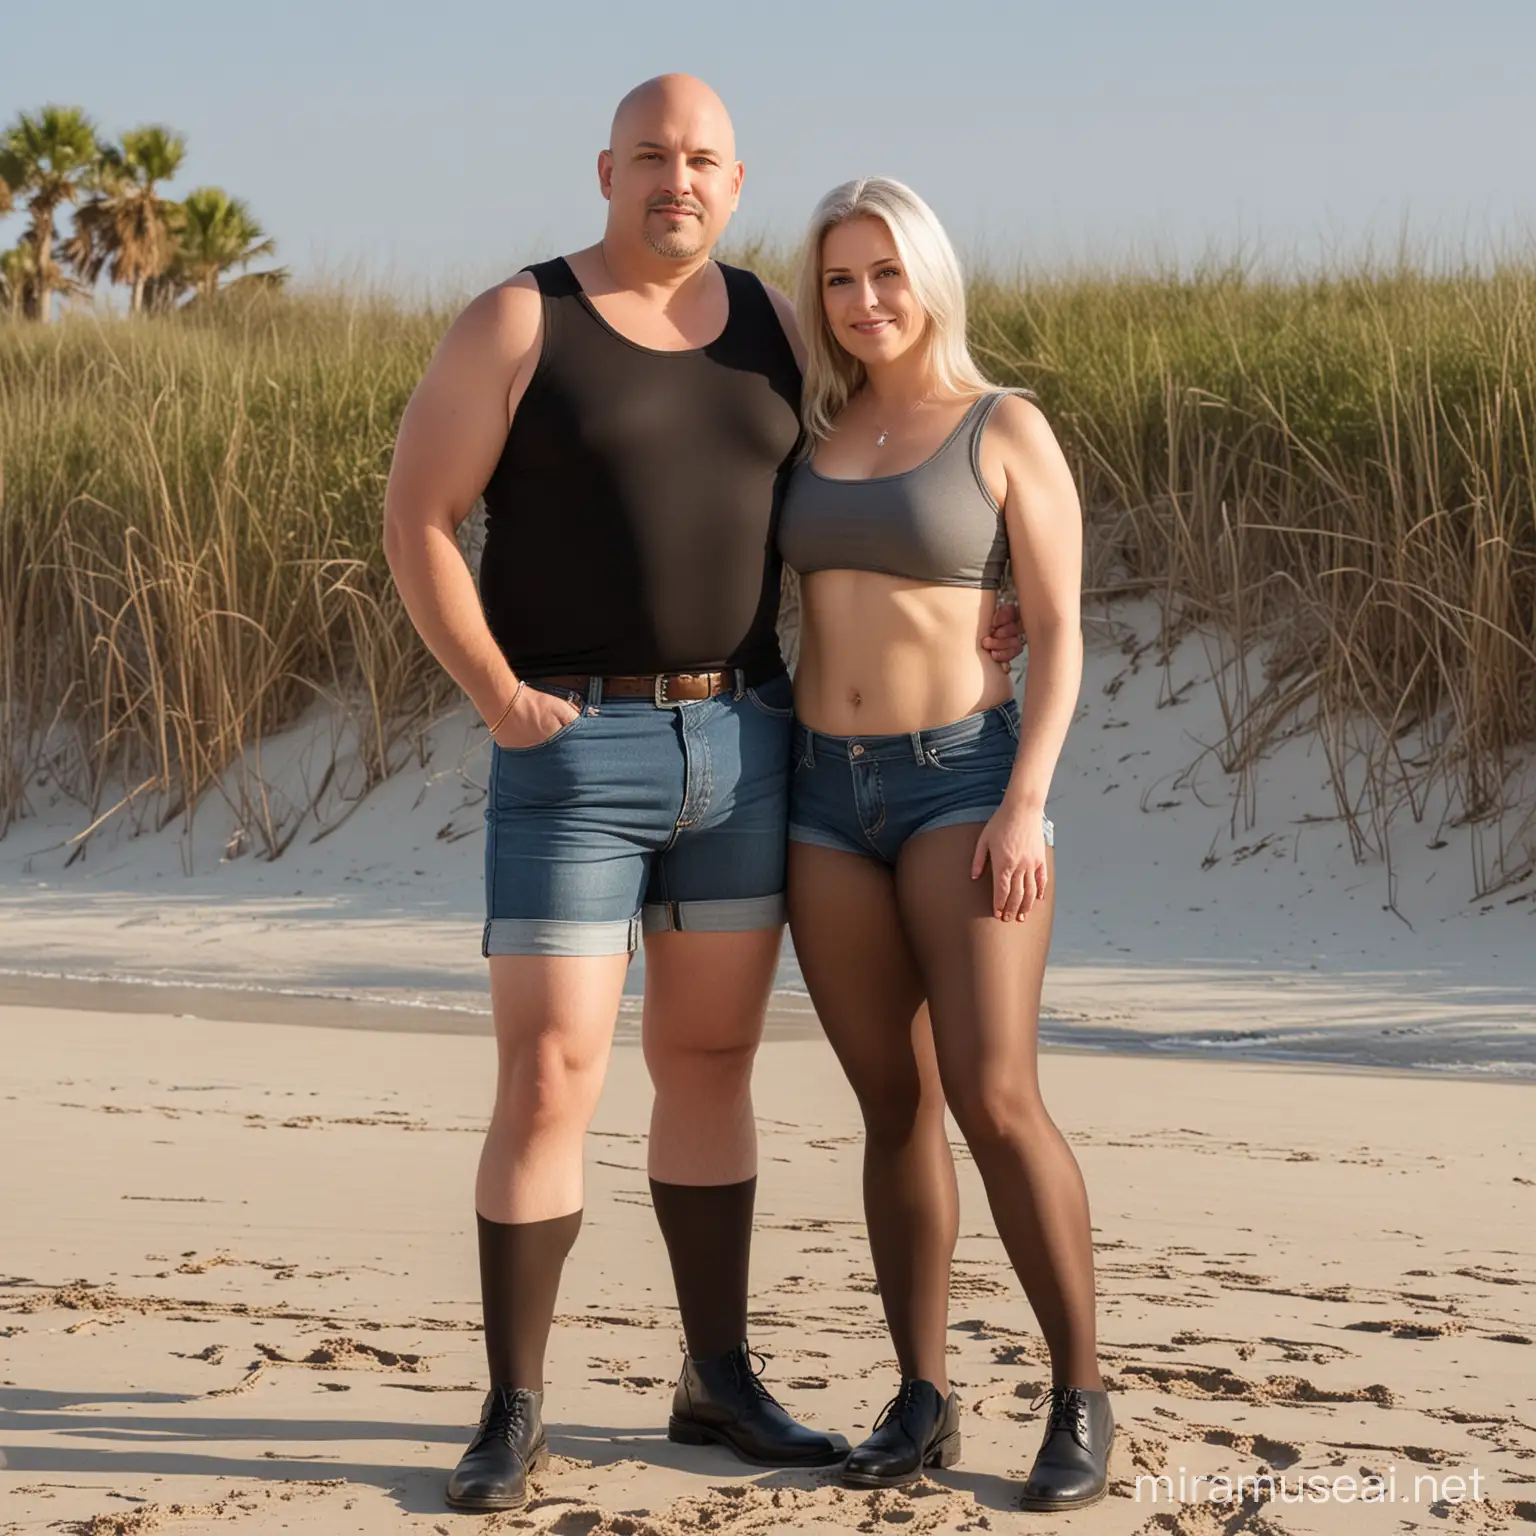 Pantyhose couple, chubby husband and thin, fit. wife, wearing shiny dark brown pantyhose nylons tights, denim jean shorts, husband chubby, 35 years old bald, small goatee. black button down shirt. Wife, long silver hair, 55 years old, large boobs, grey tank top, wearing shiny dark brown pantyhose, standing on sandy florida beach